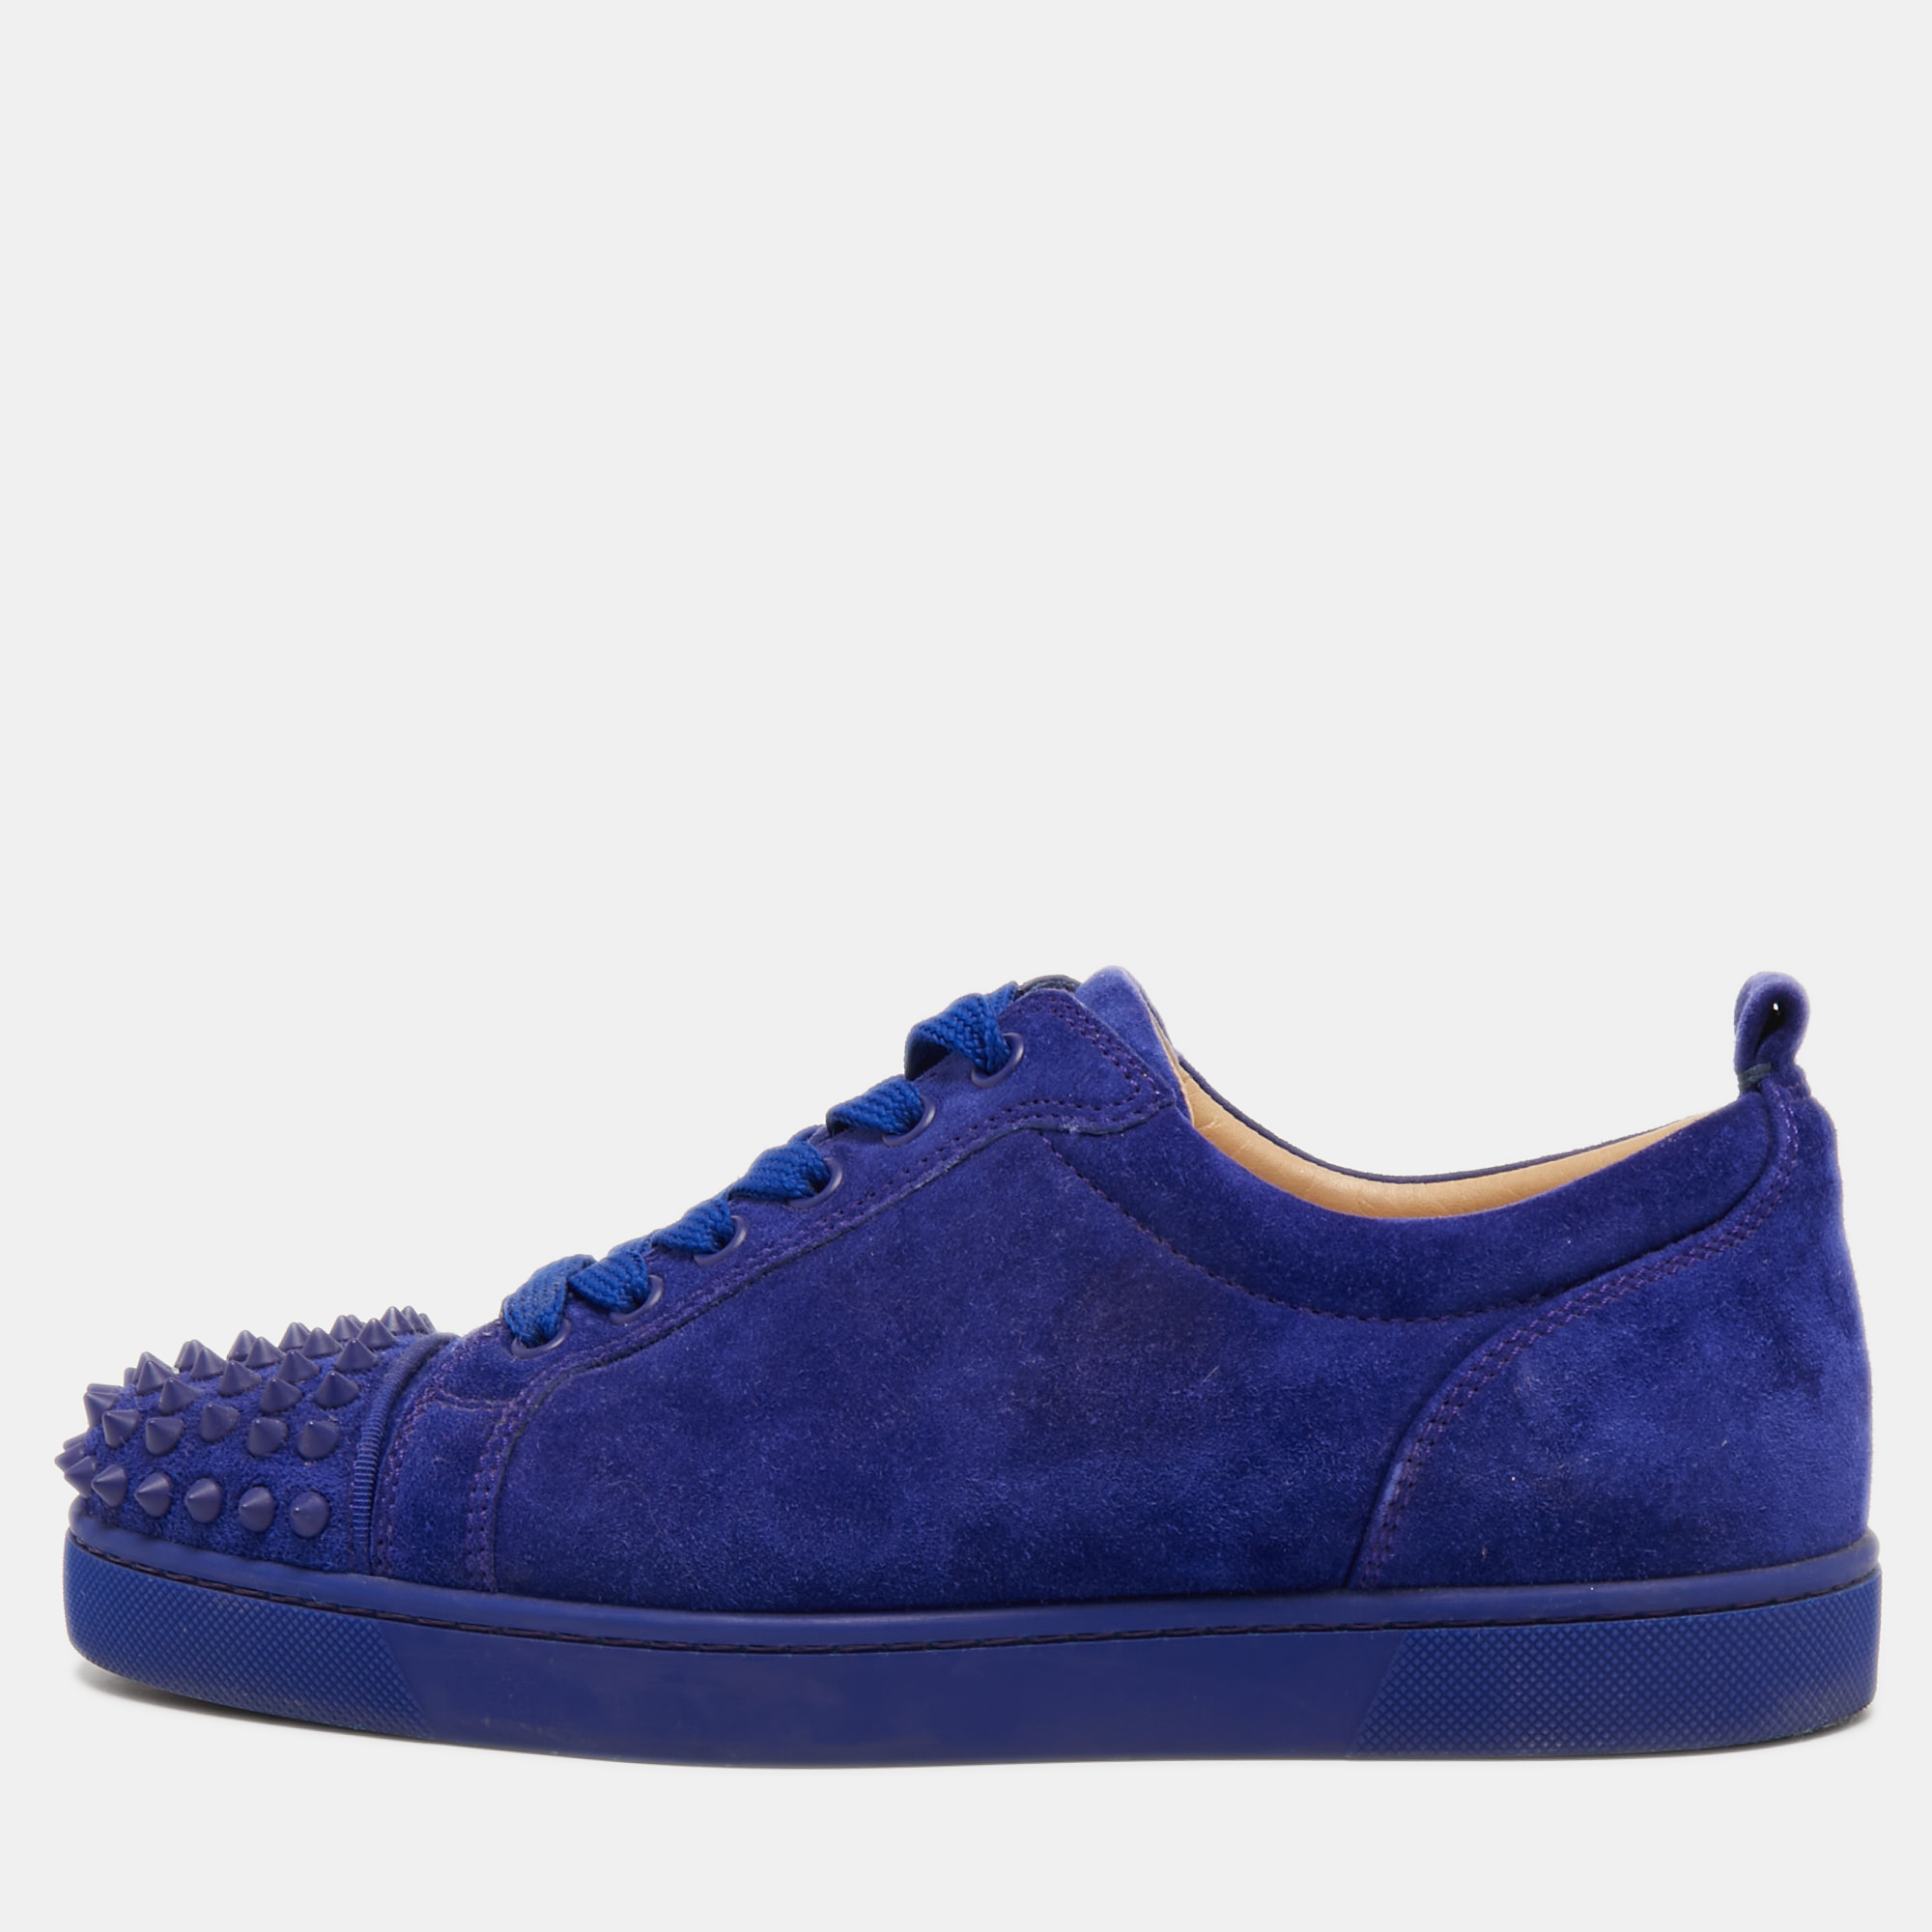 Pre-owned Christian Louboutin Blue Suede Louis Junior Spike Sneakers Size 39